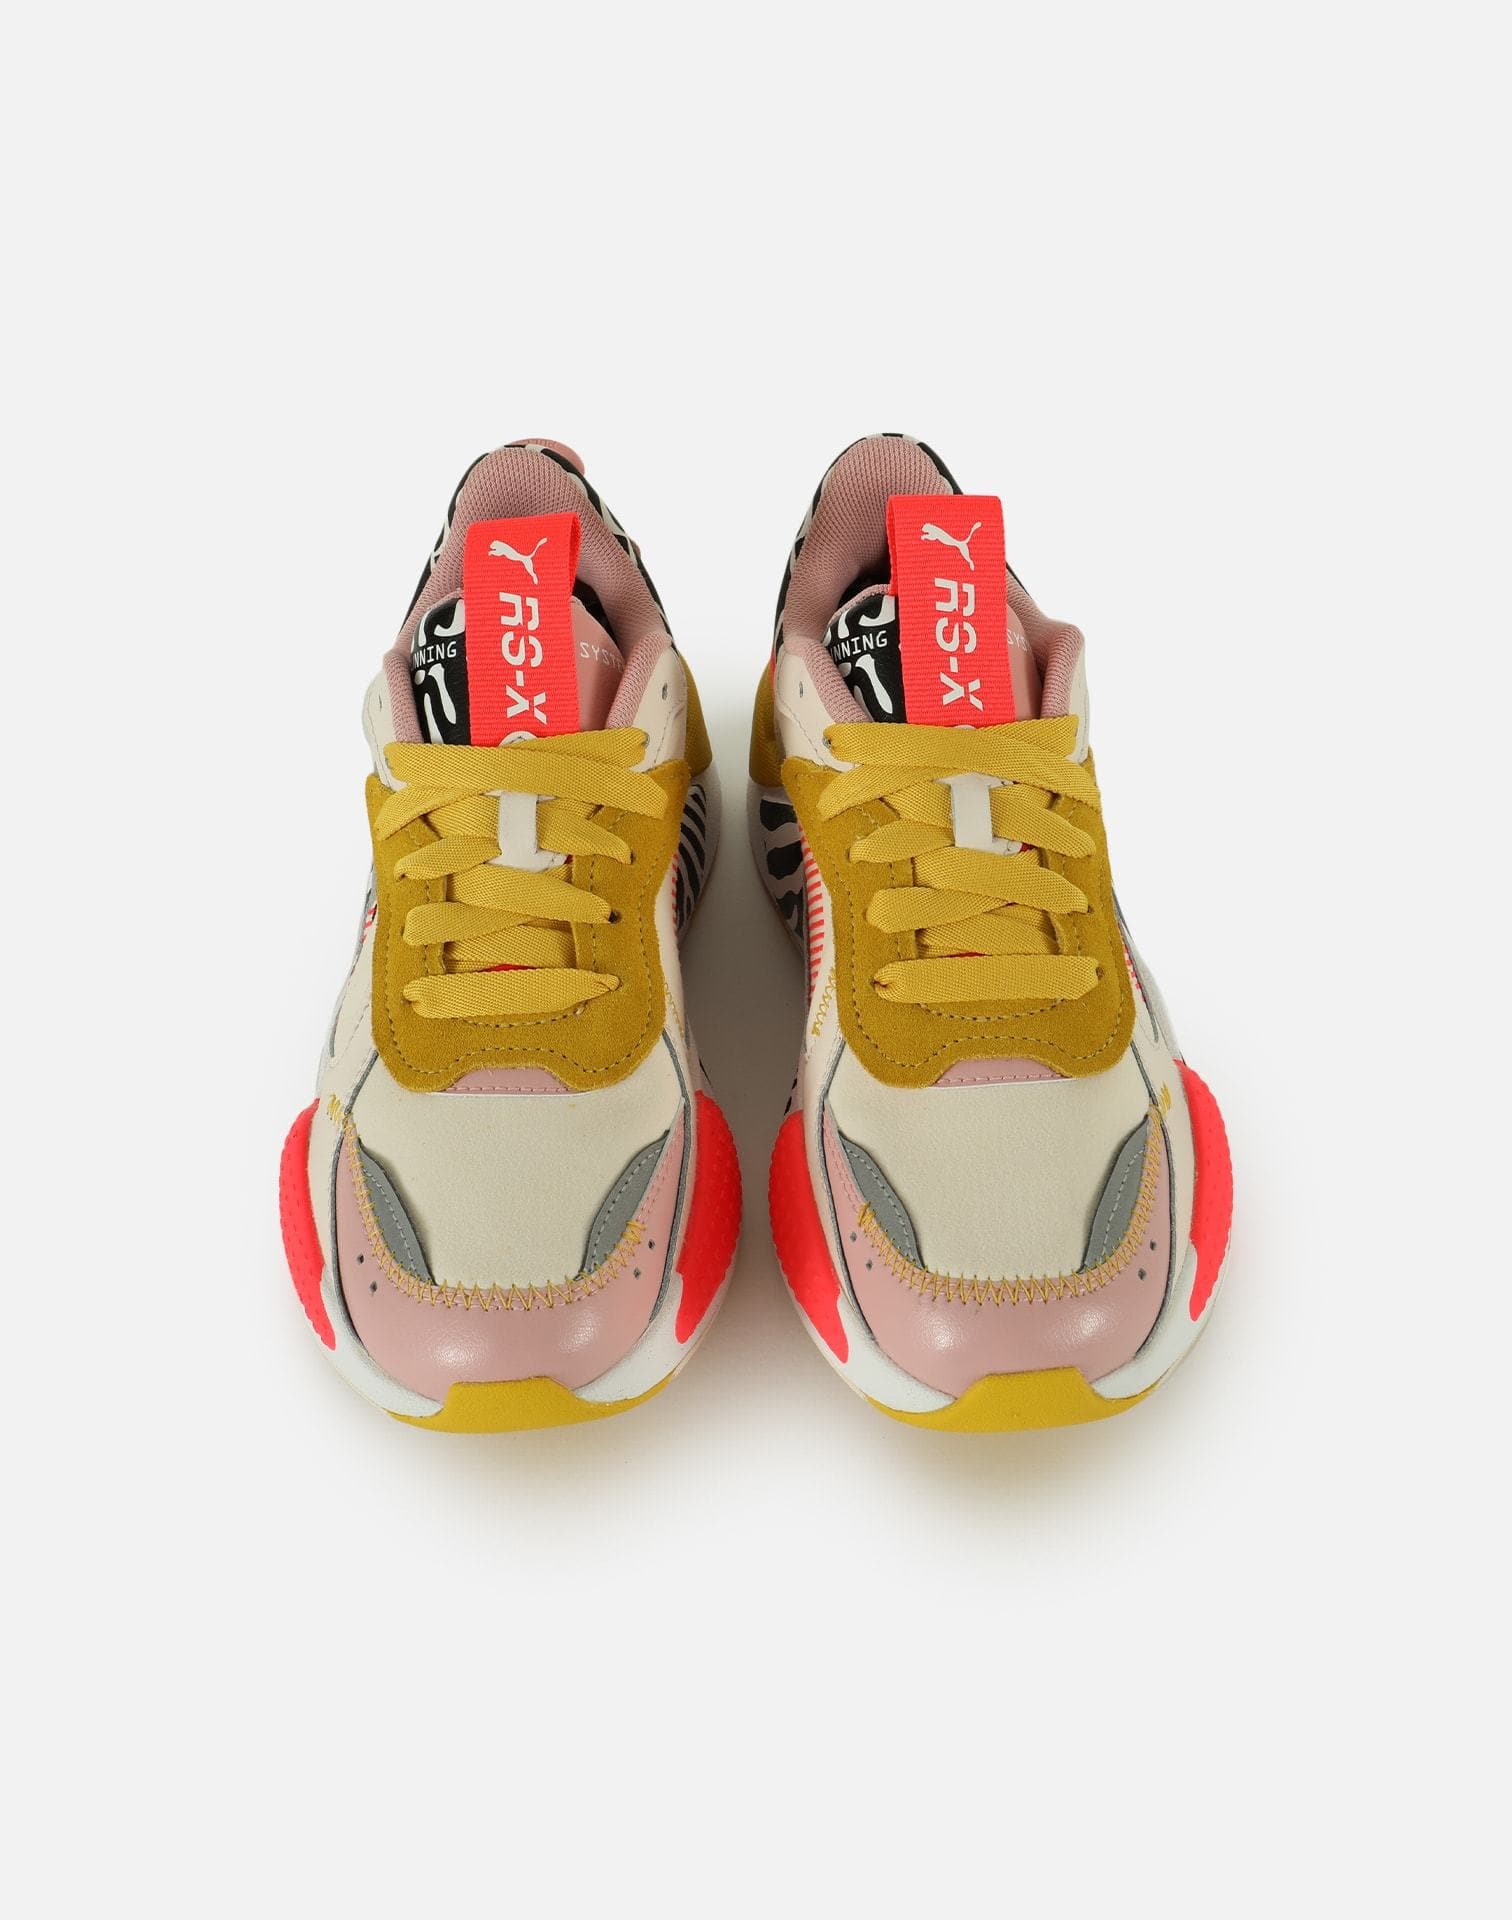 PUMA Women's RS-X 'Unexpected'